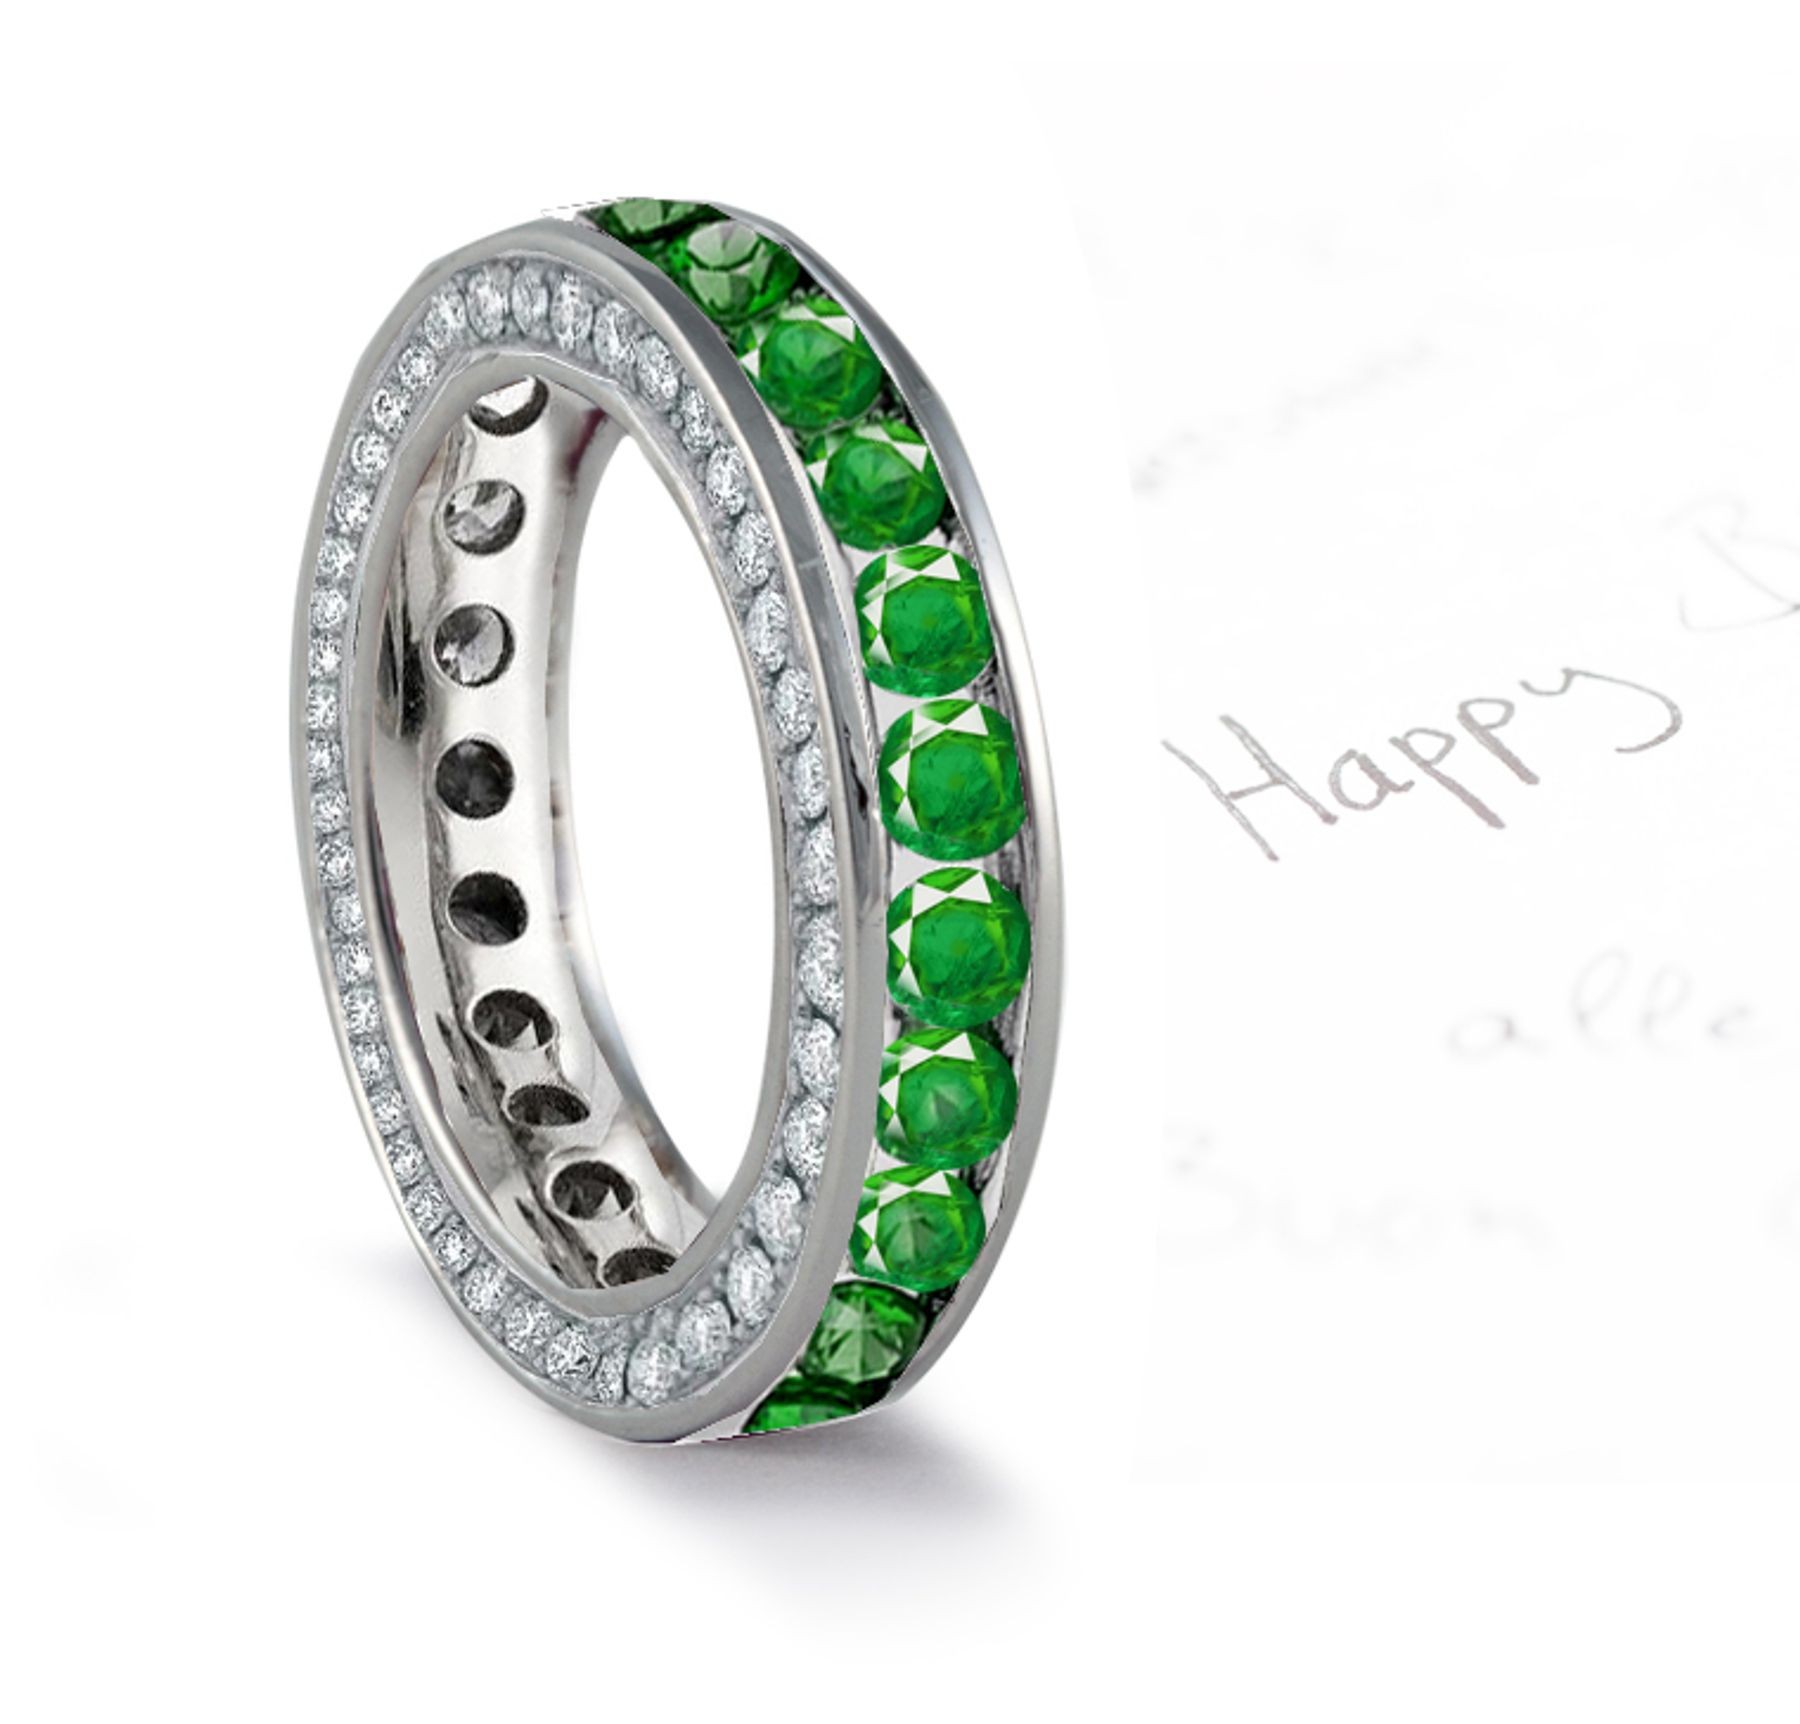 Rich Hues United in Sparkling Light: Antique Emerald Diamond Gold Wedding Band with Victorian Scrolls & Motifs - NEW DESIGN